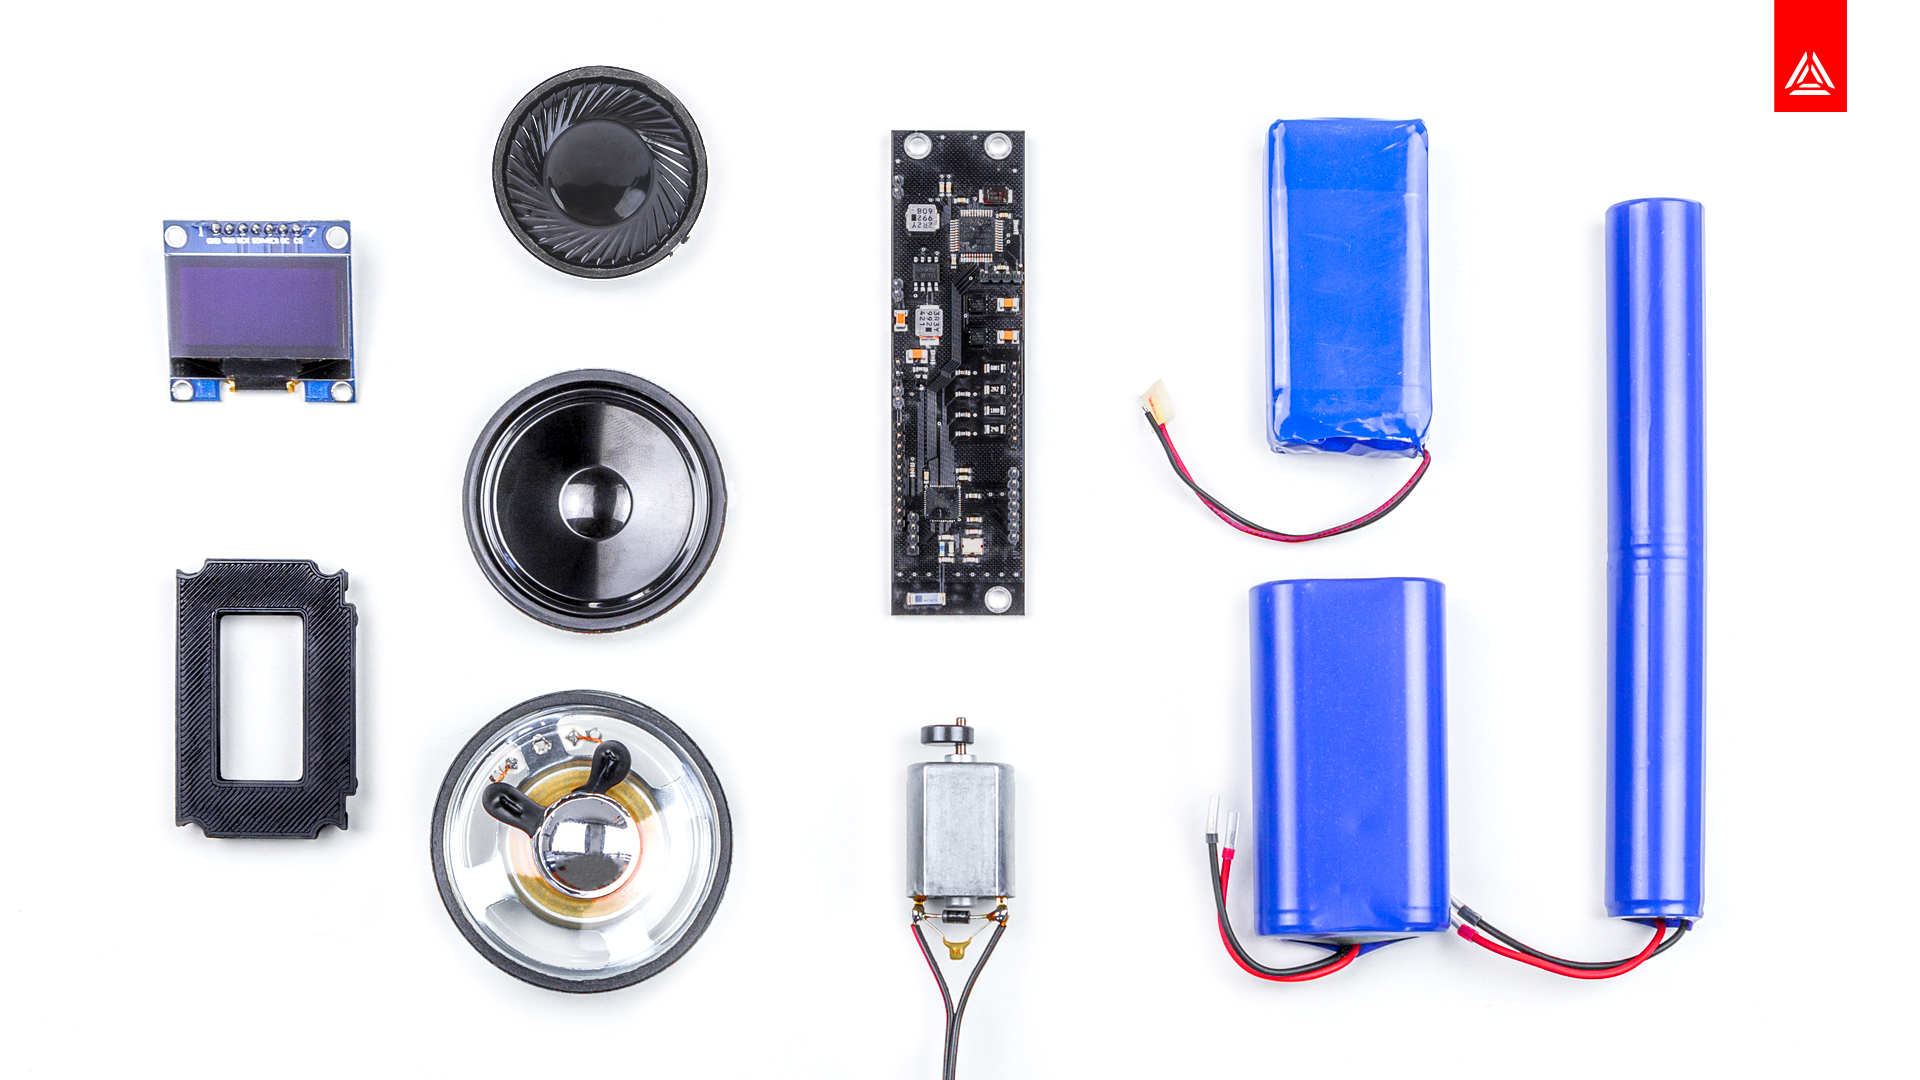 The electronics kit for Alphatag is now in online store!